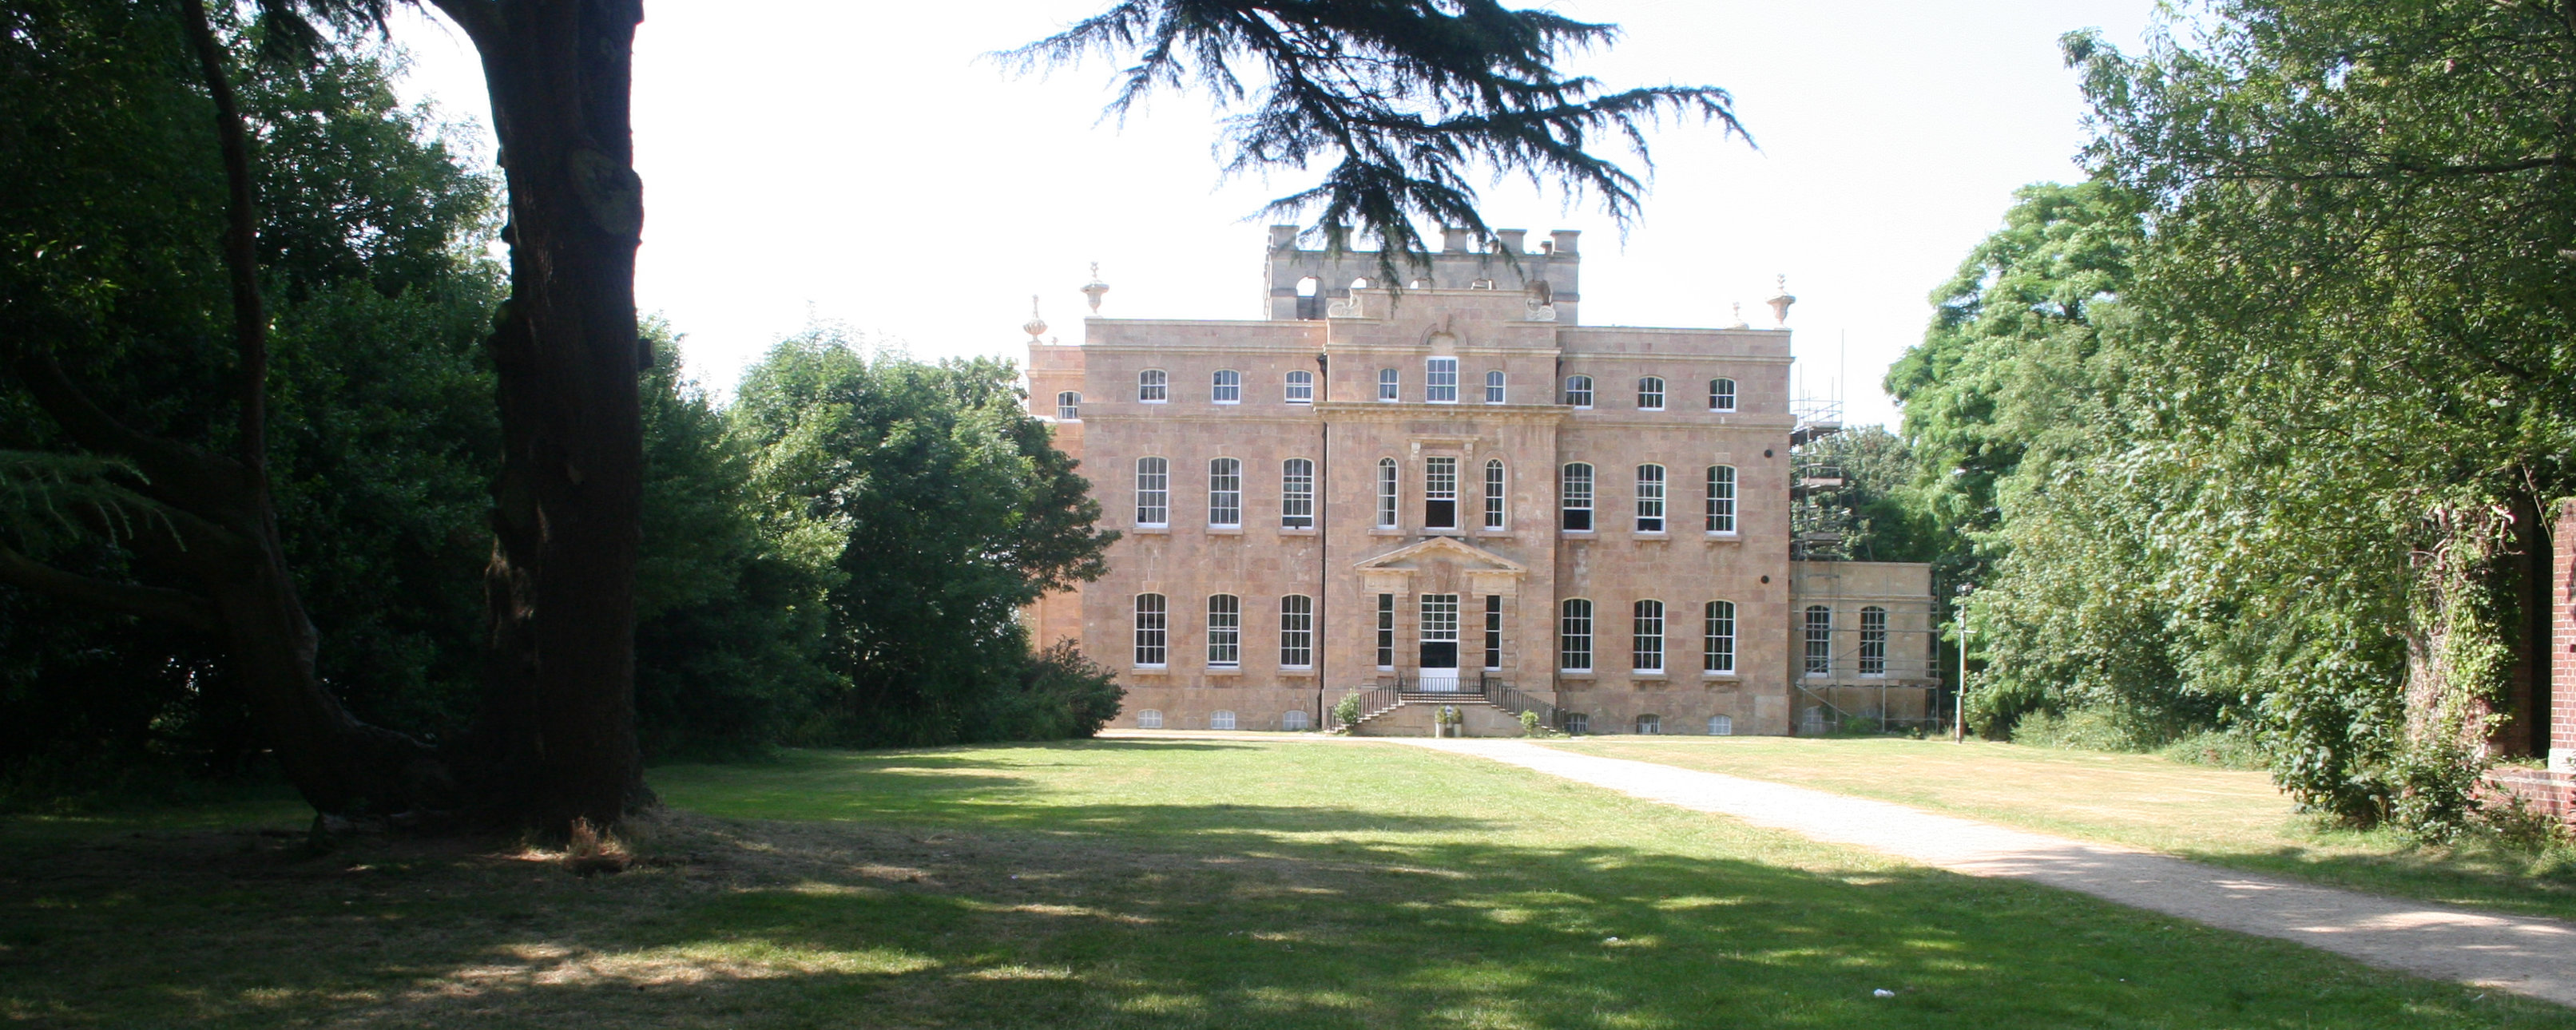 The East facade of Kings Weston House after cleaning of the stonework